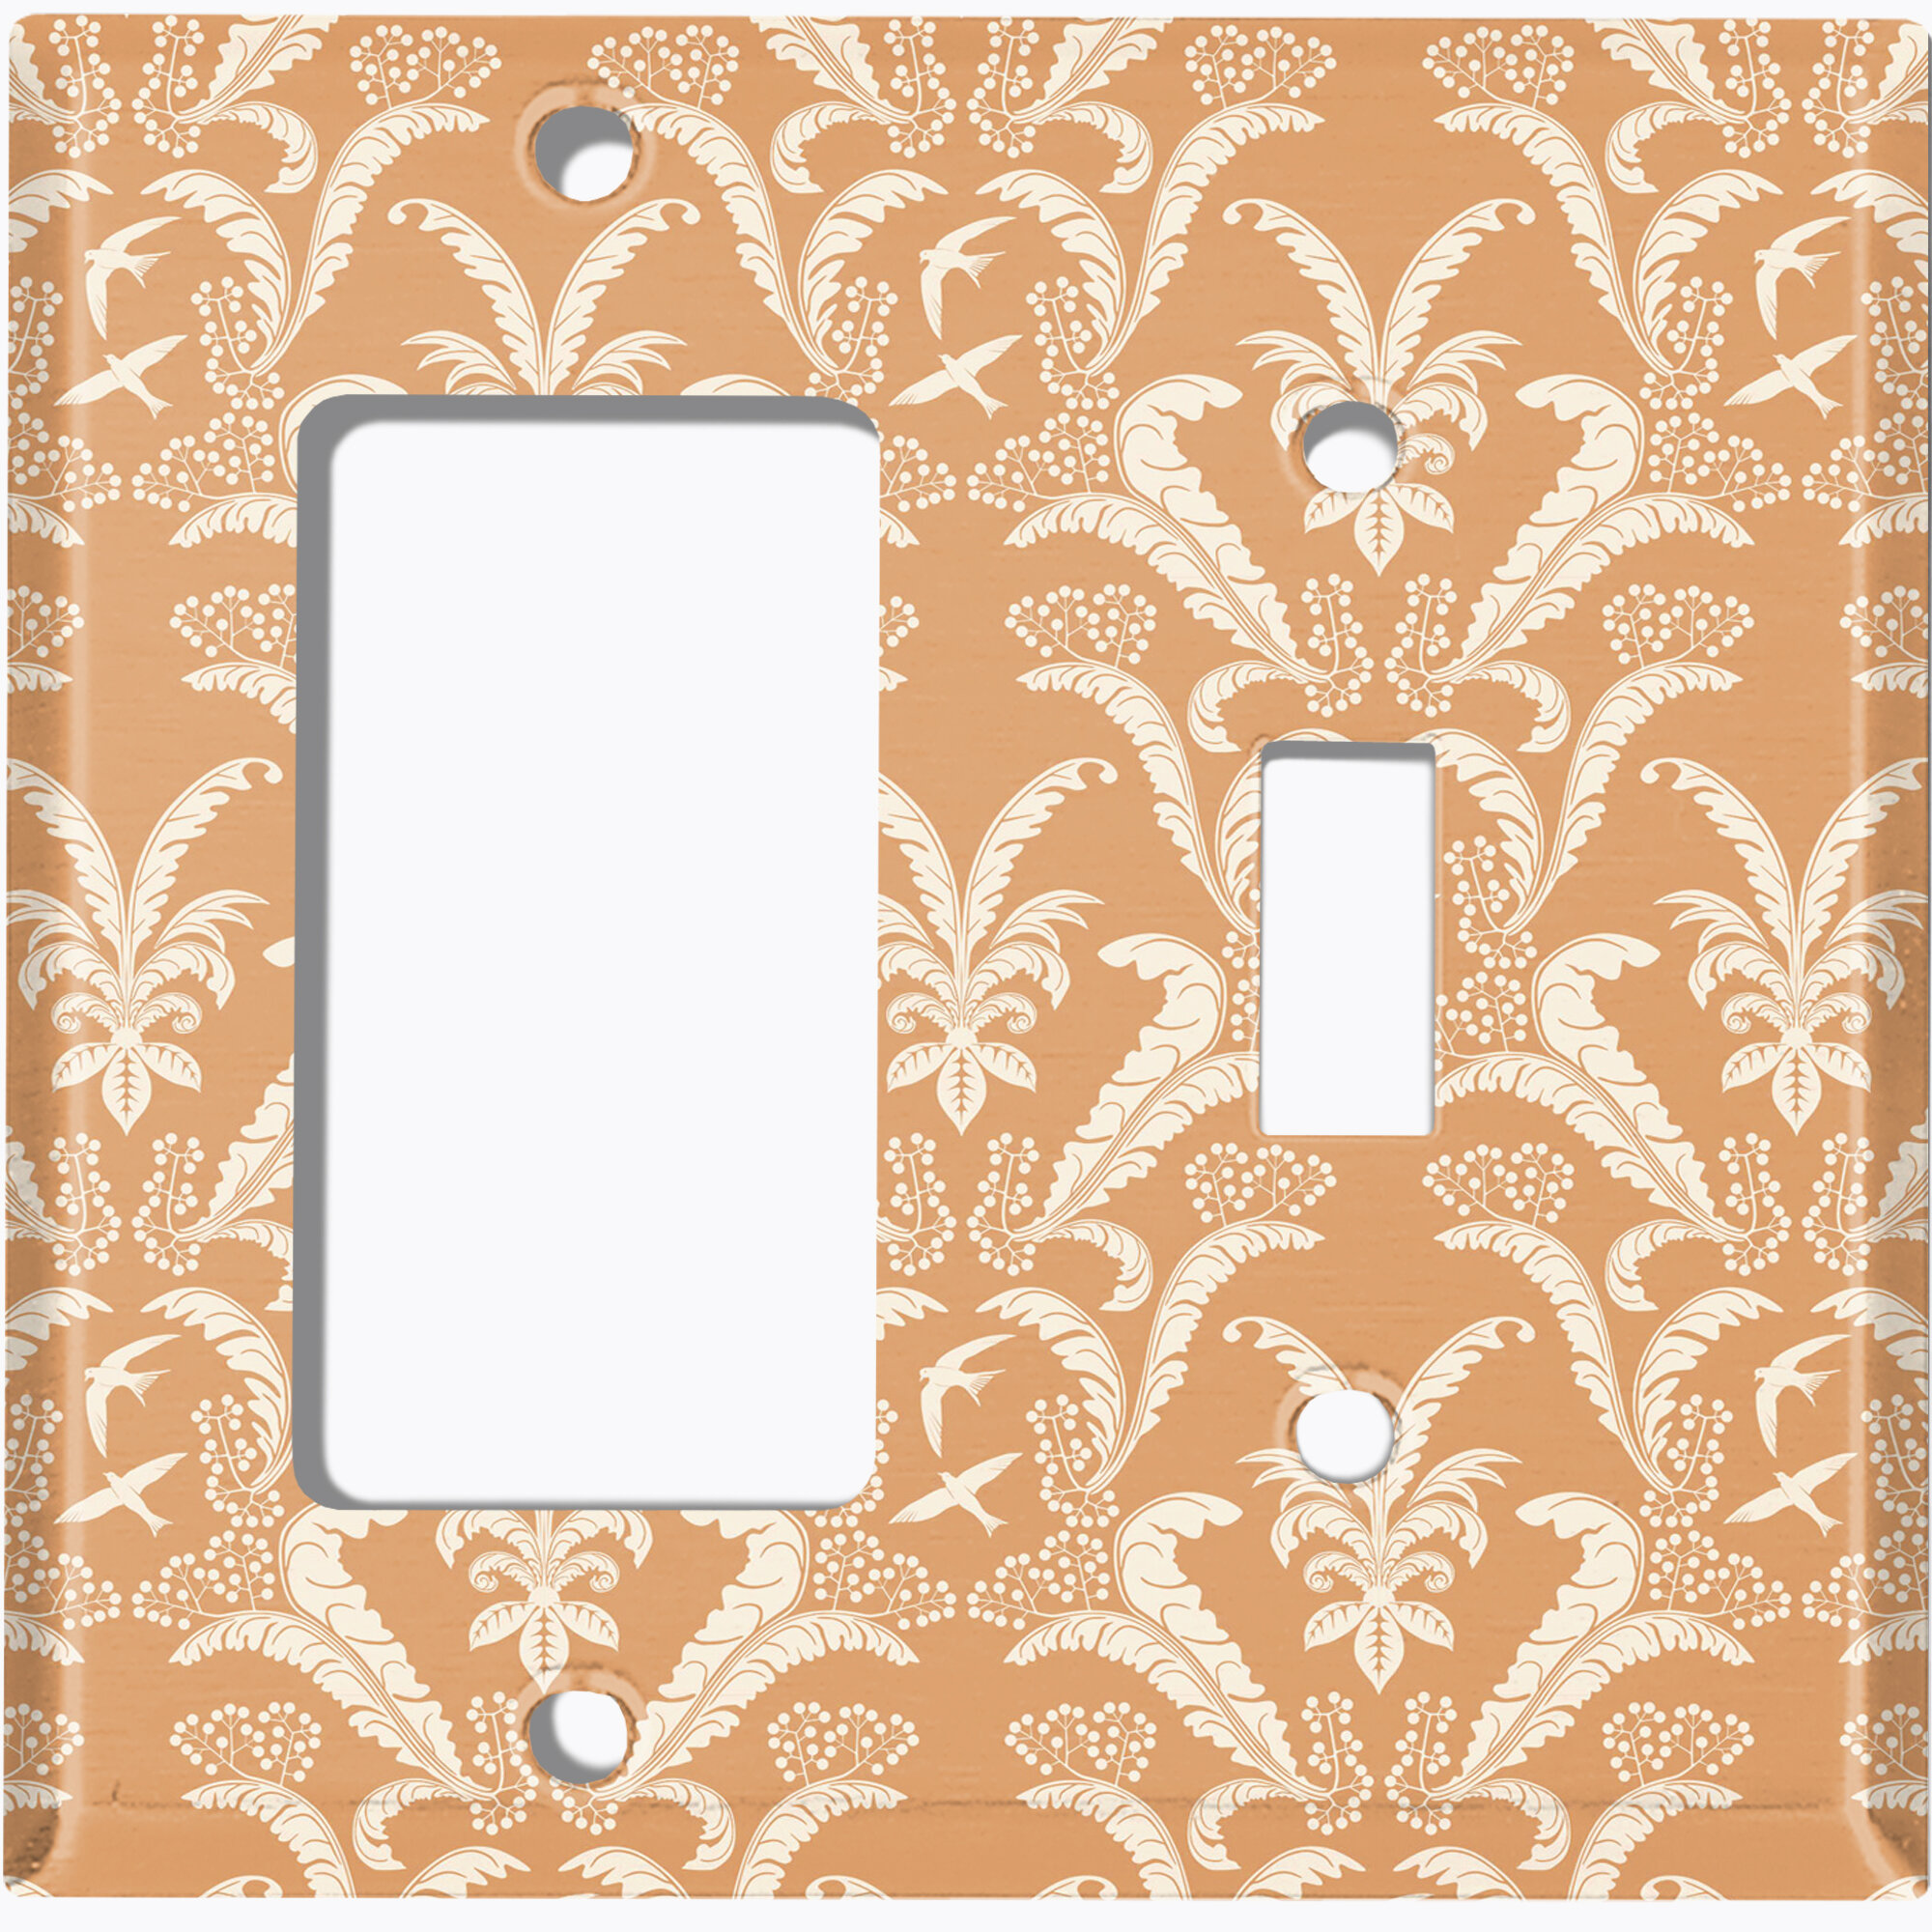 WorldAcc Metal Light Switch Plate Outlet Cover (Damask Feather Tan